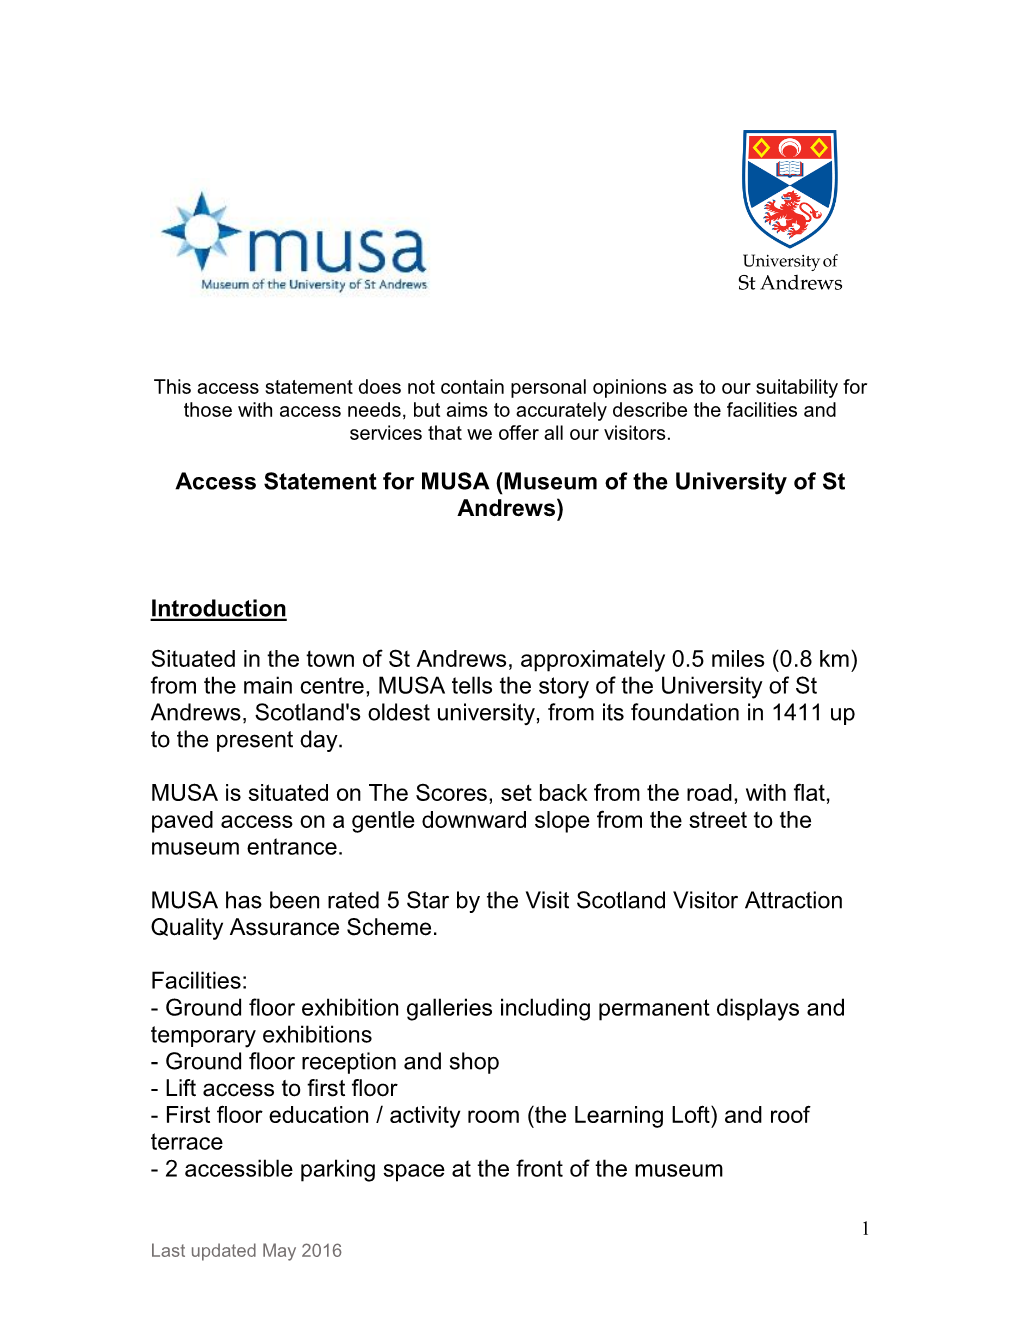 Access Statement for MUSA (Museum of the University of St Andrews)